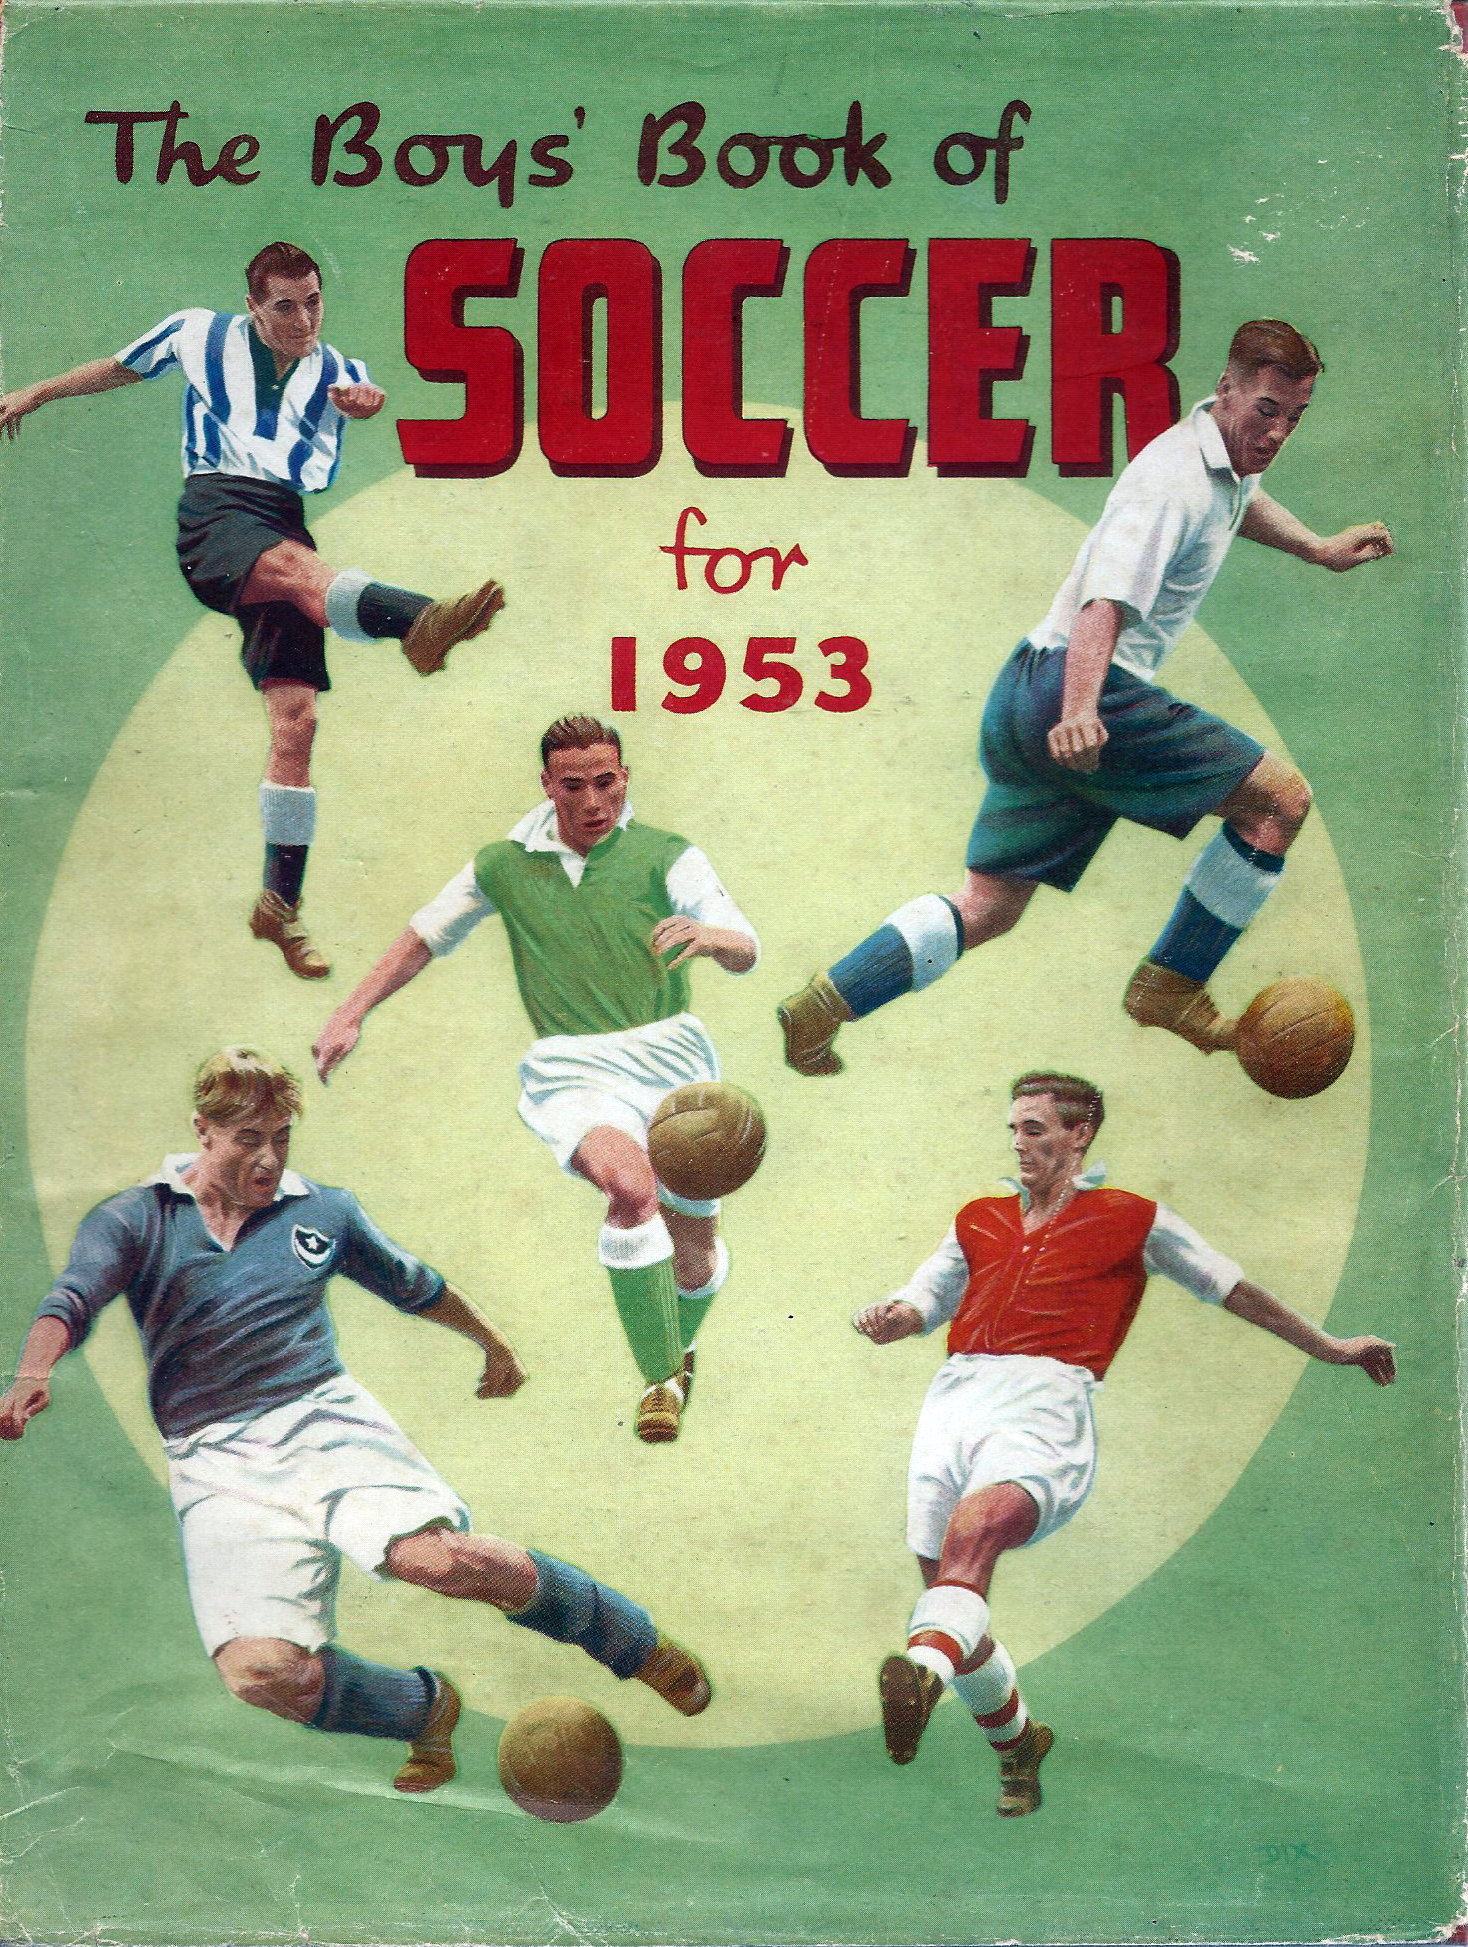 The Boys Book of Soccer 1953